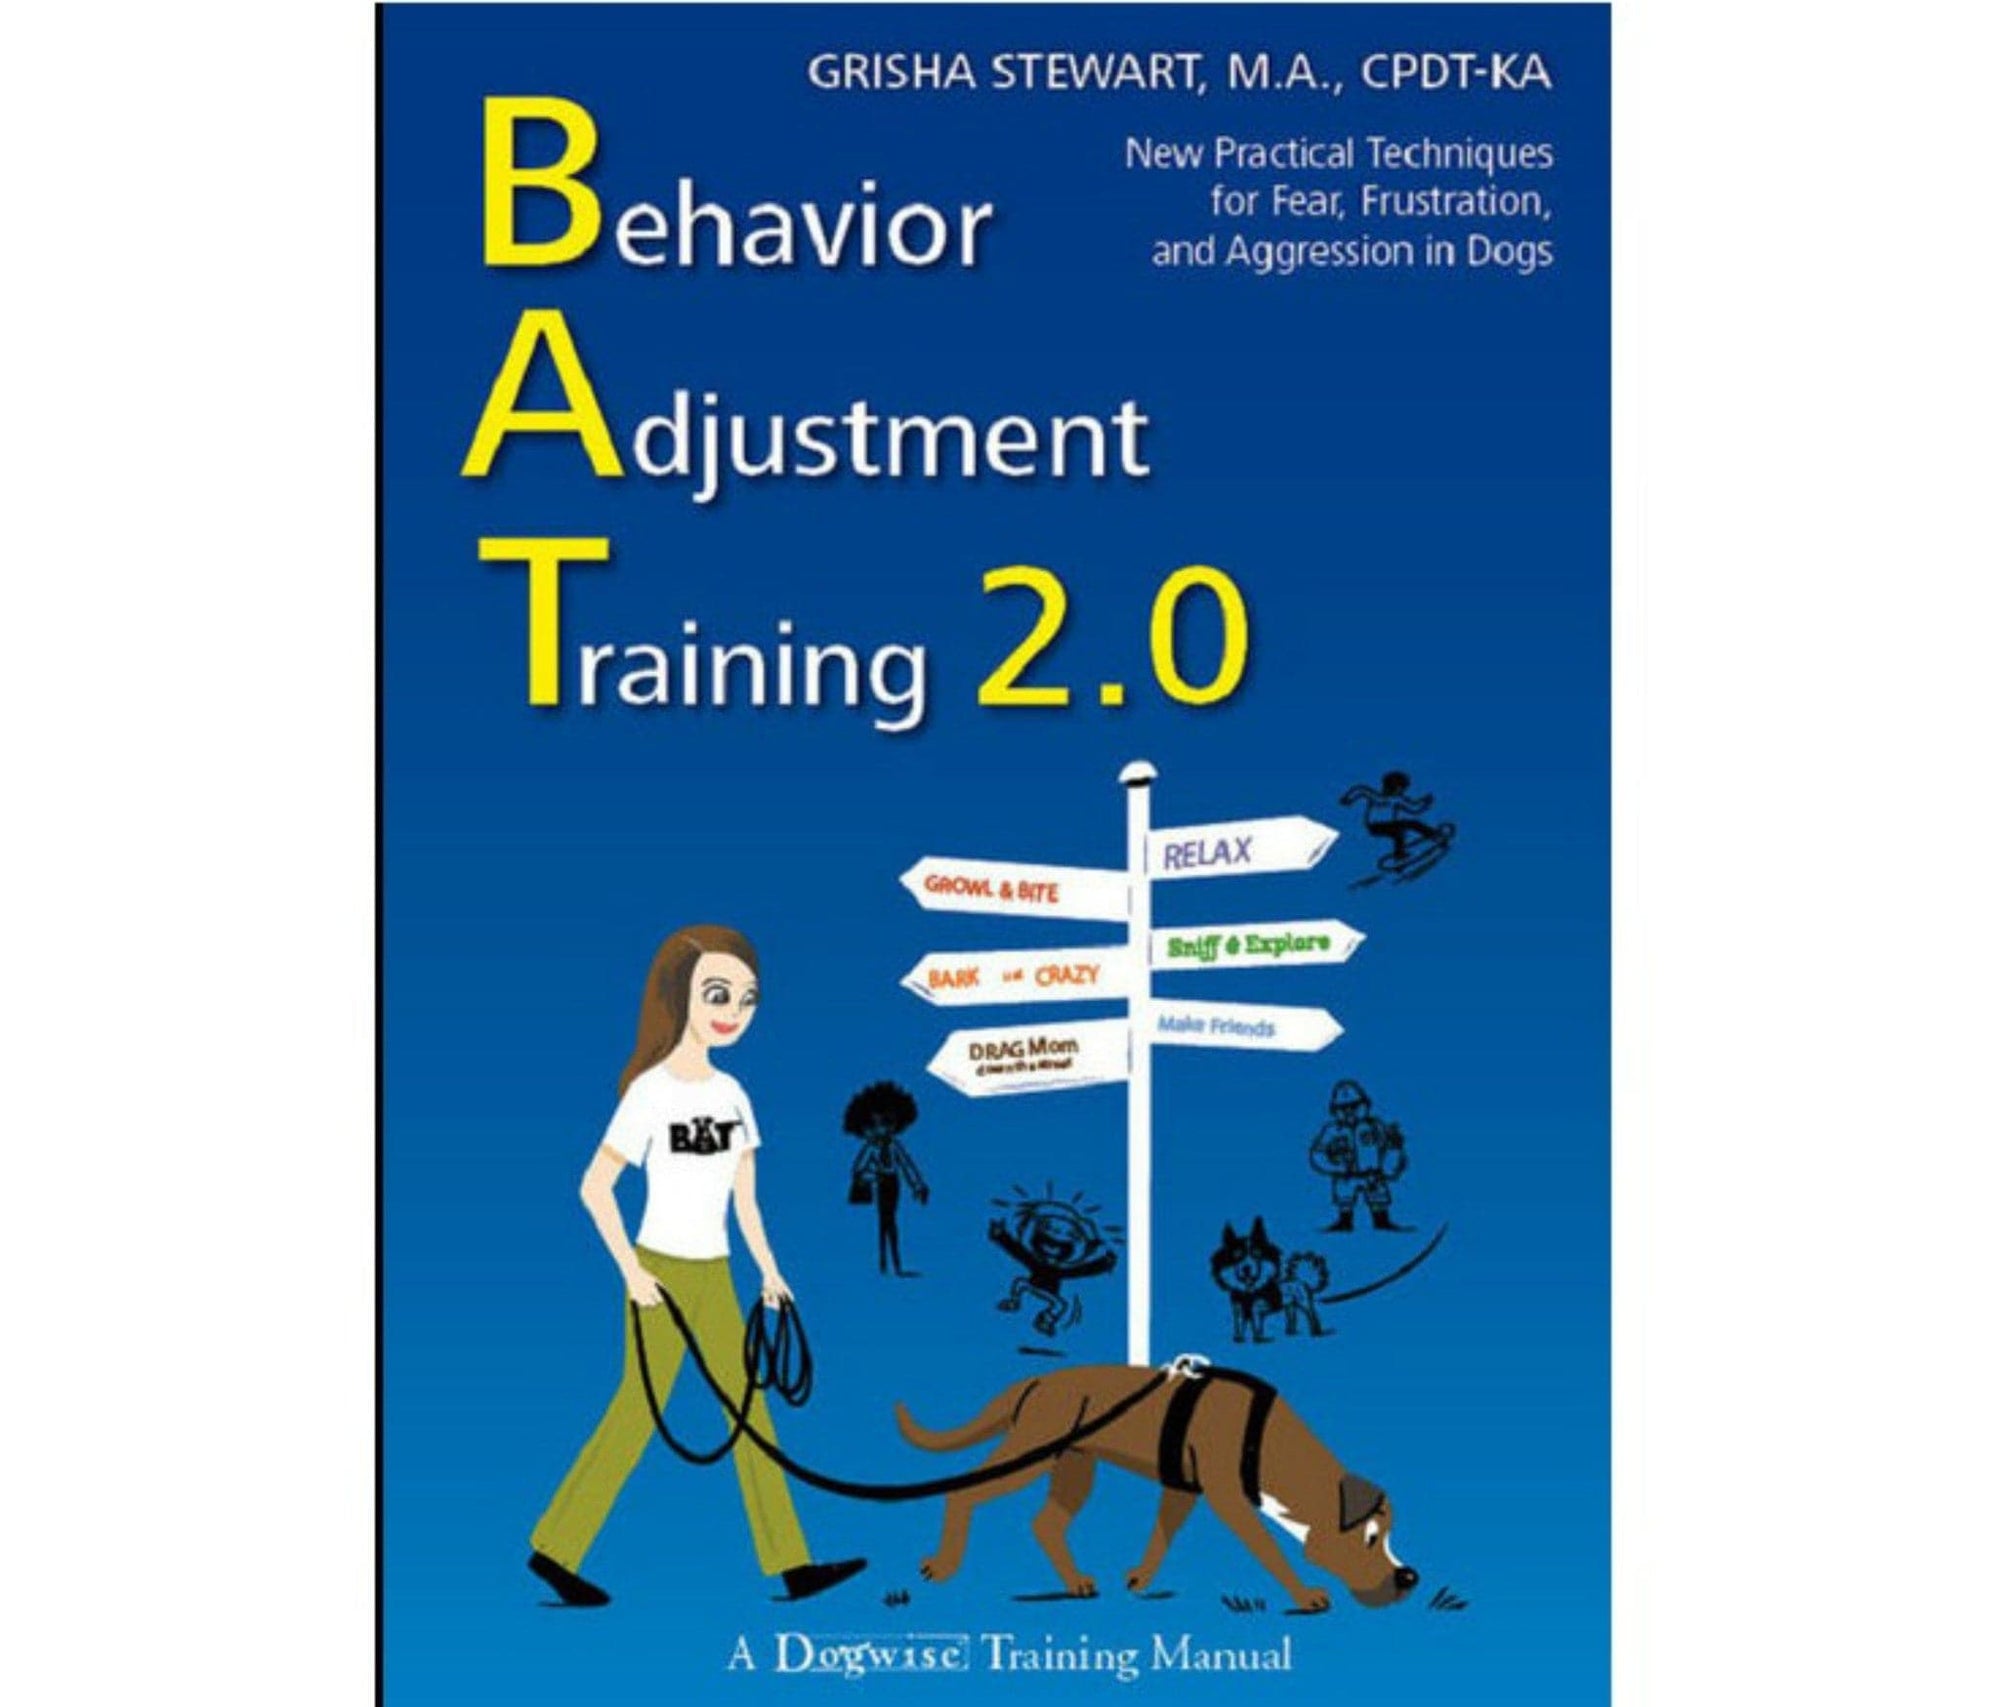 E-BOOK Behavior Adjustment Training 2.0: New Practical Techniques for Fear, Frustration, and Aggression by Grisha Stewart